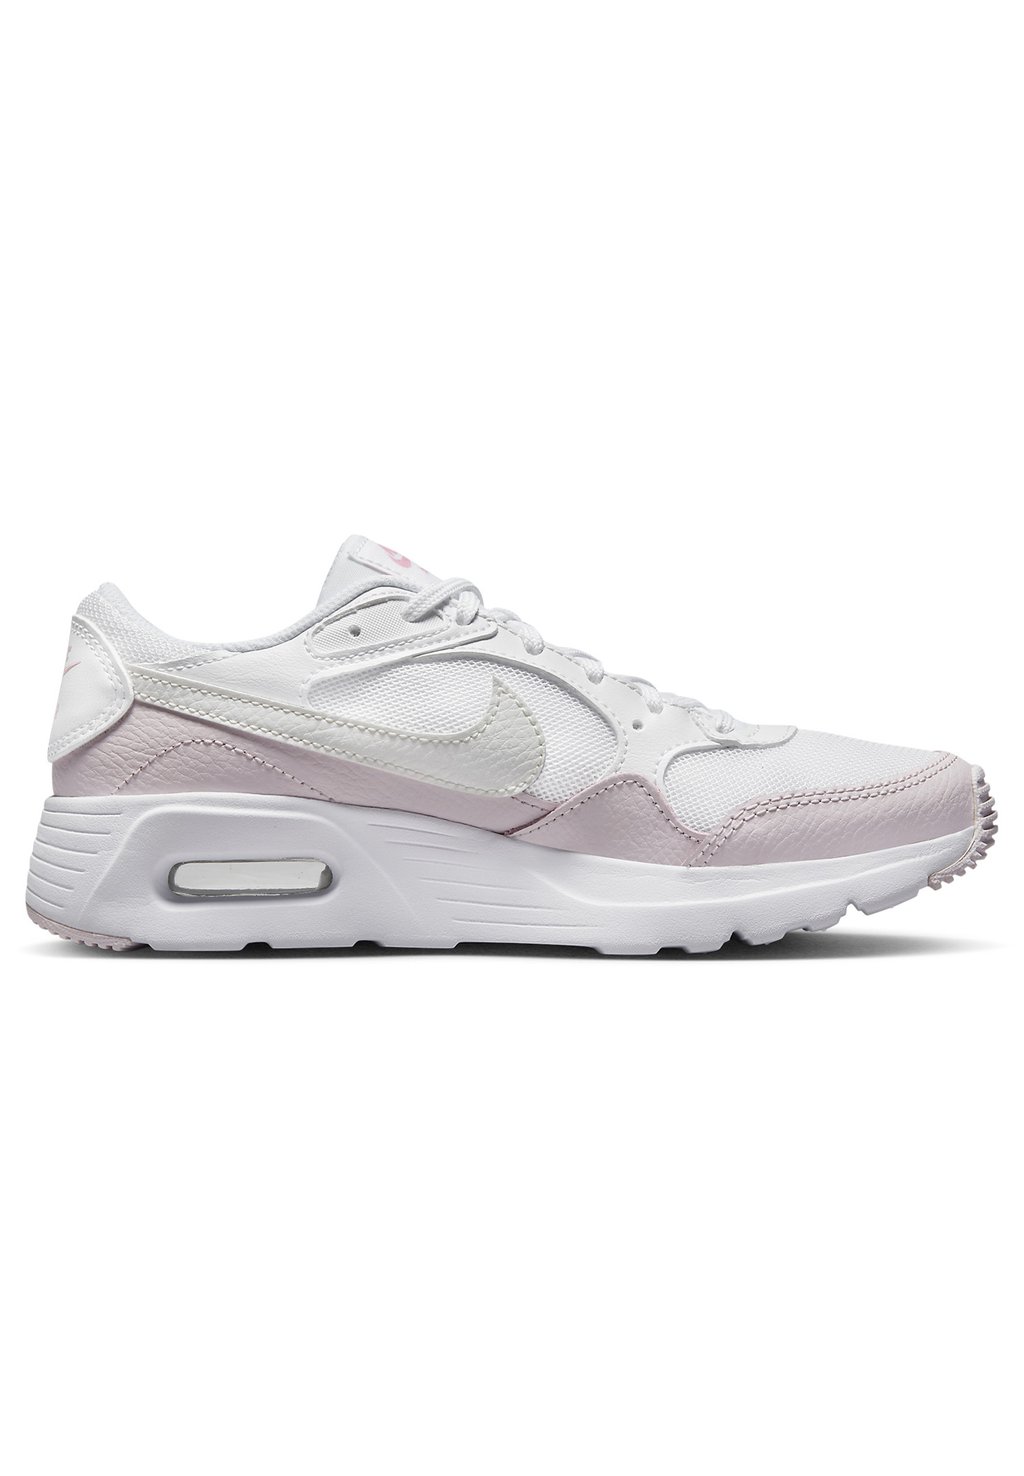 Низкие кроссовки Nike Air Max Sc (Gs) Nike, цвет white/summit white-pearl pink-med soft pink